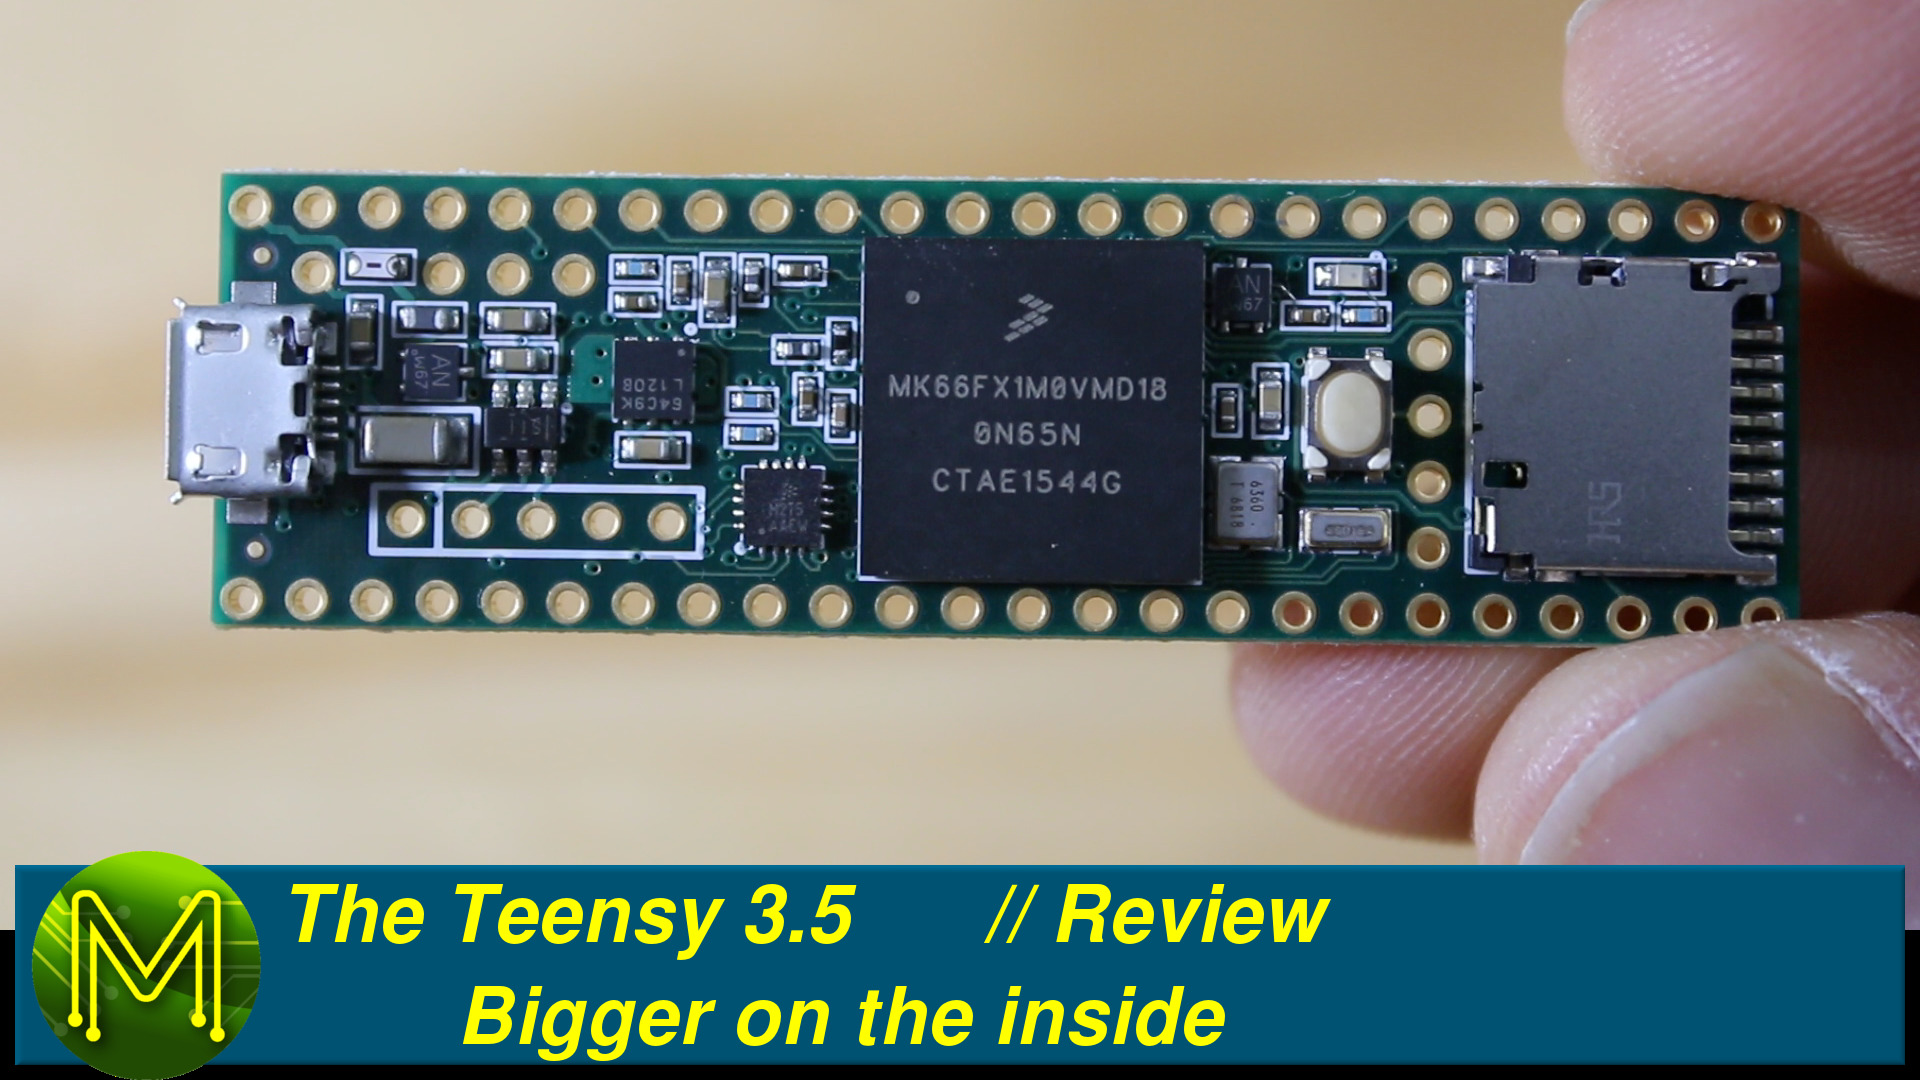 The Teensy 3.5: Bigger on the inside. // Review